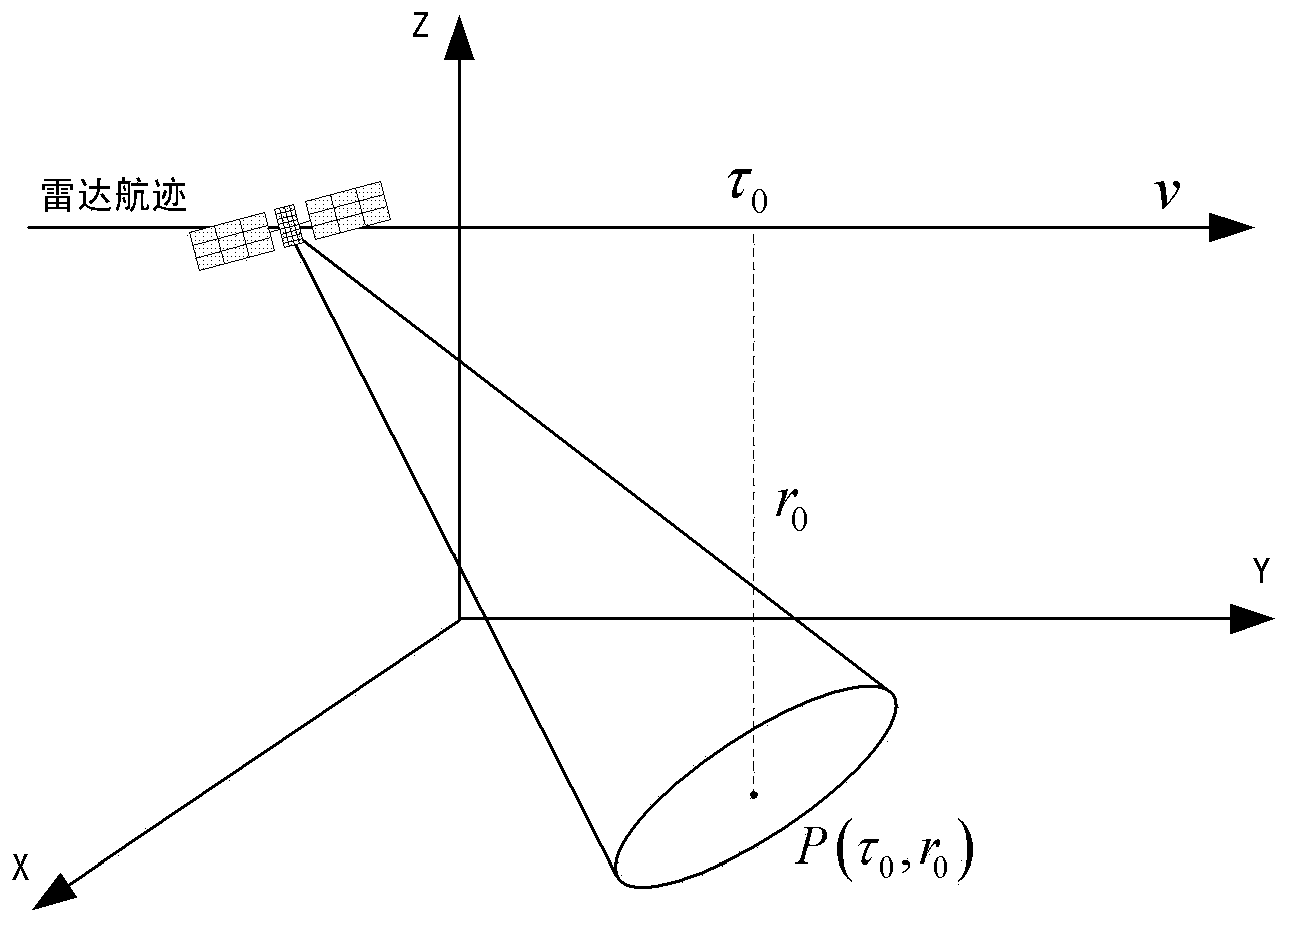 Imaging method of synthetic aperture radar in large squint angle mode